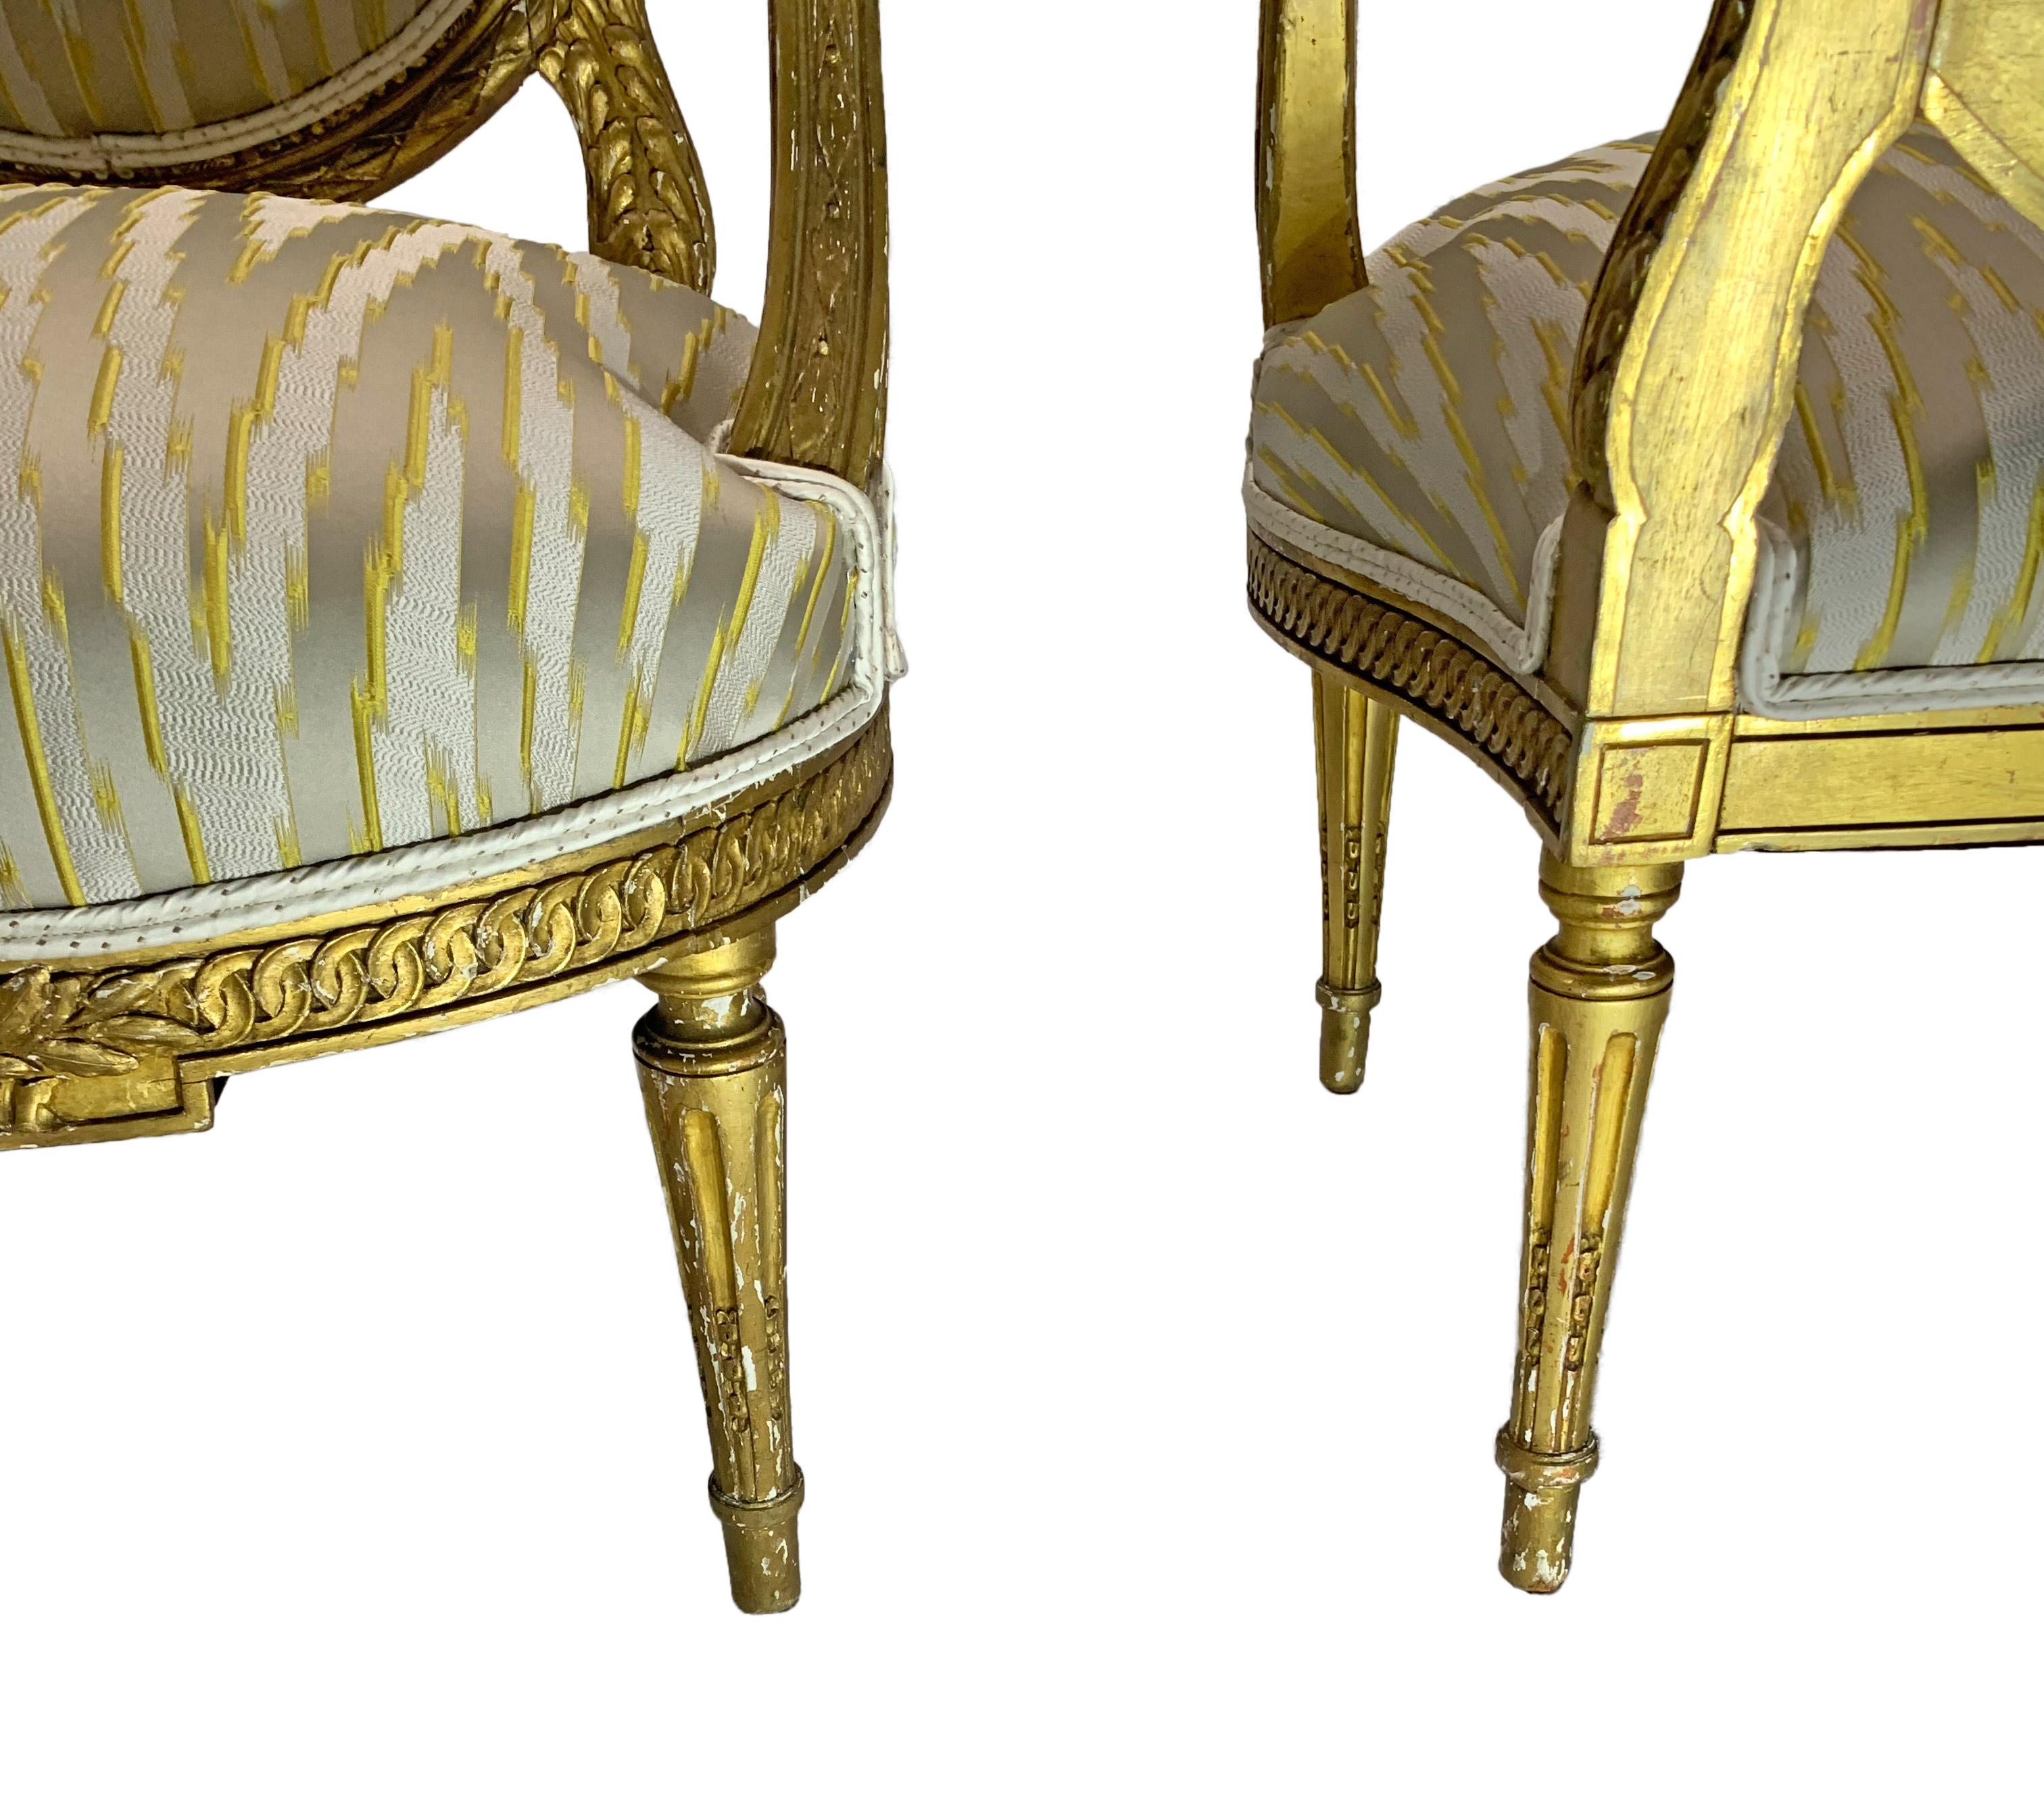 19th century pair of giltwood Louis XVI style French oval back armchairs. These chairs were owned by couple who worked at US Embassy in Paris, France during the 1960s. The chairs are sturdy and have recently been reupholstered in a contemporary